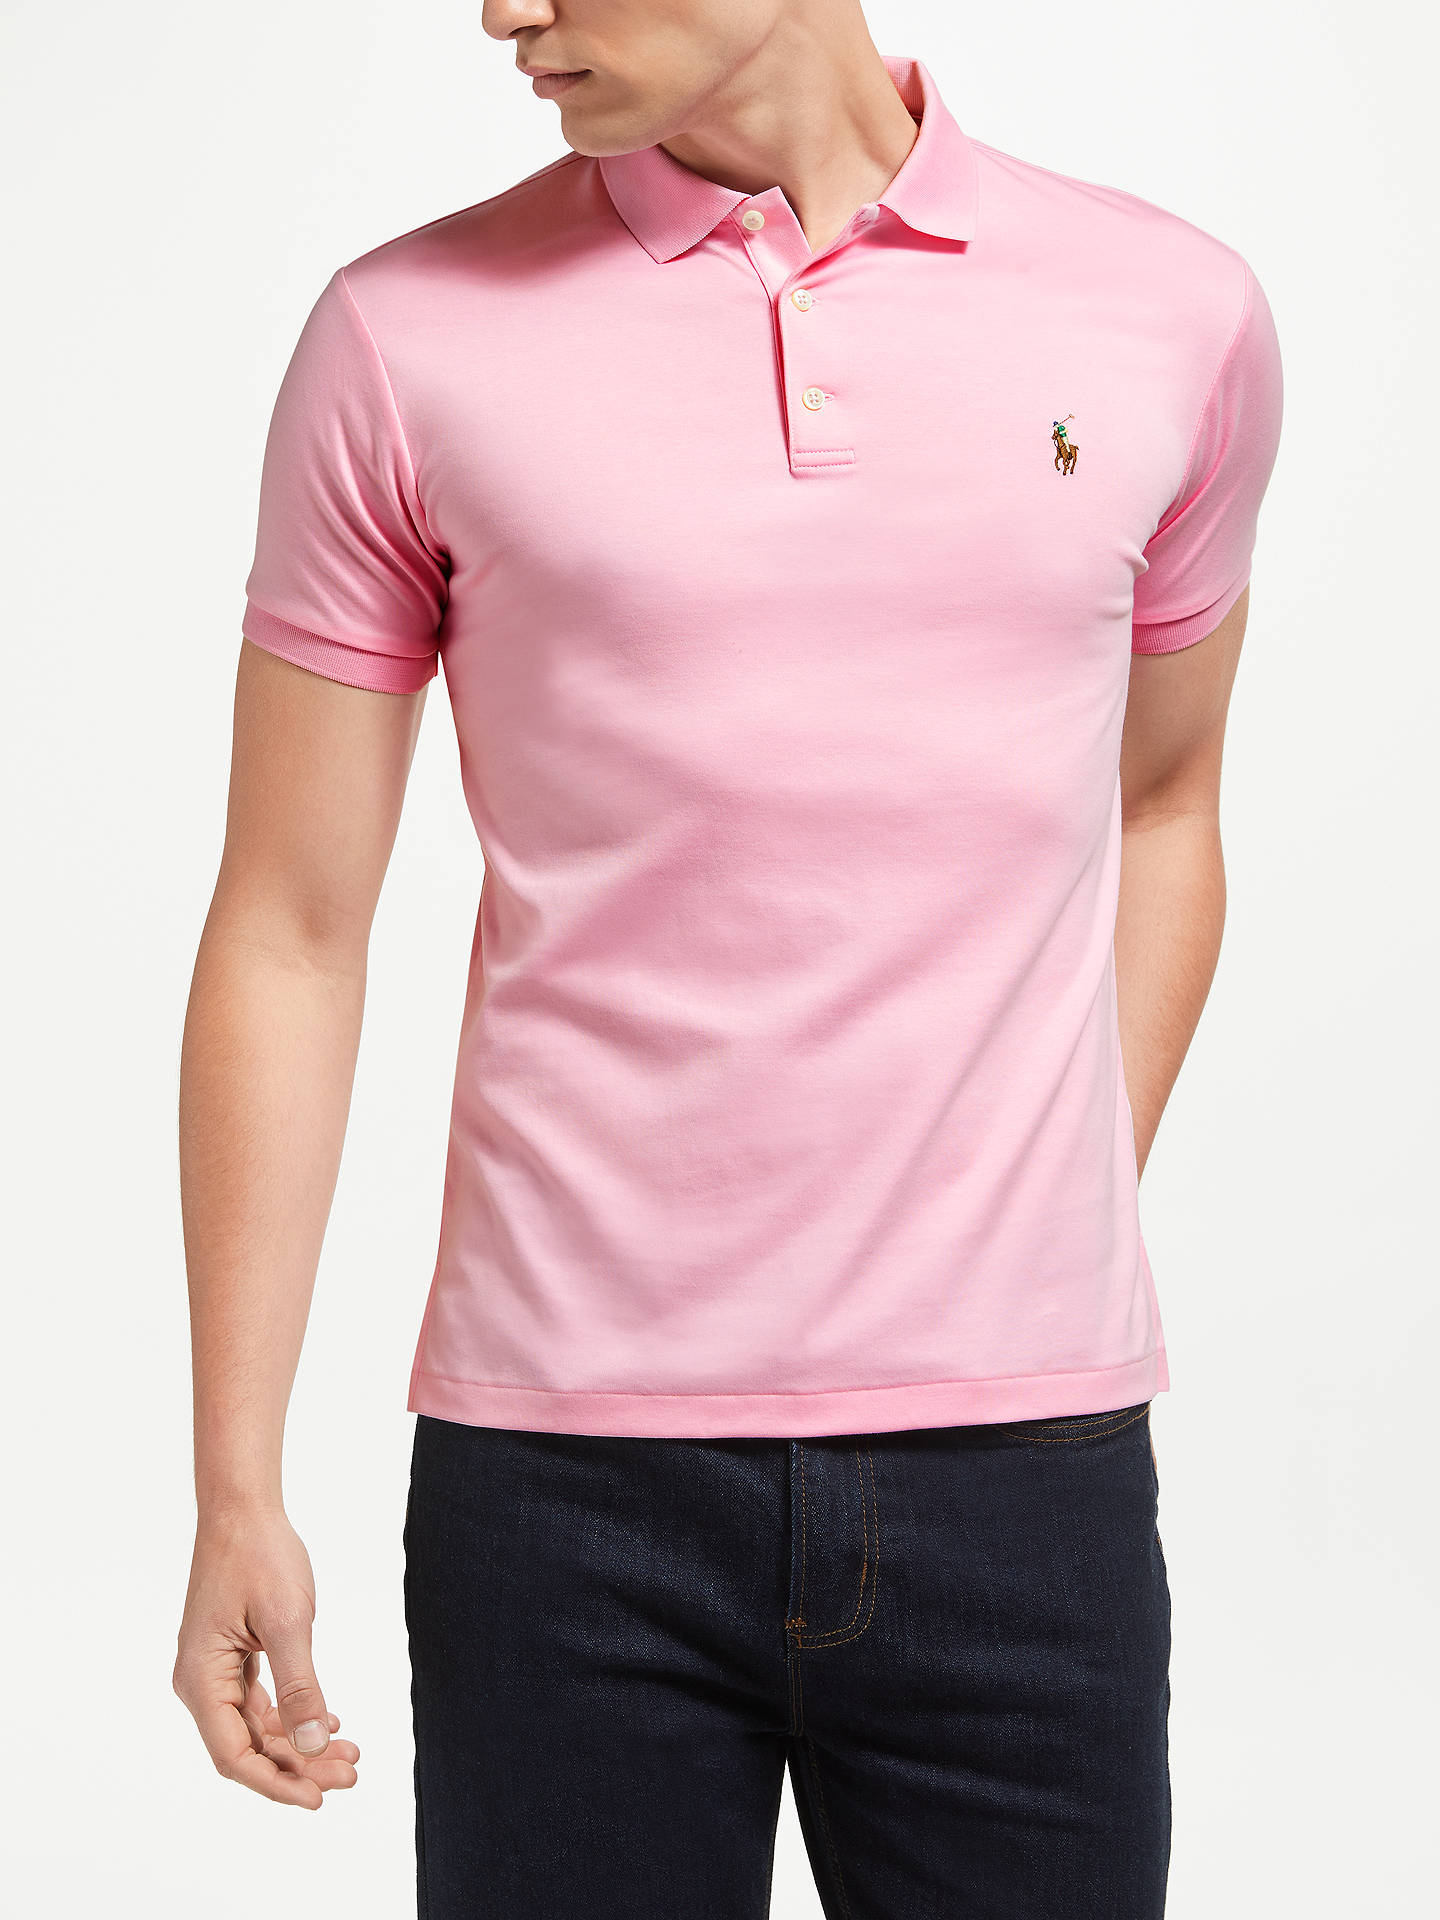 Pink polos